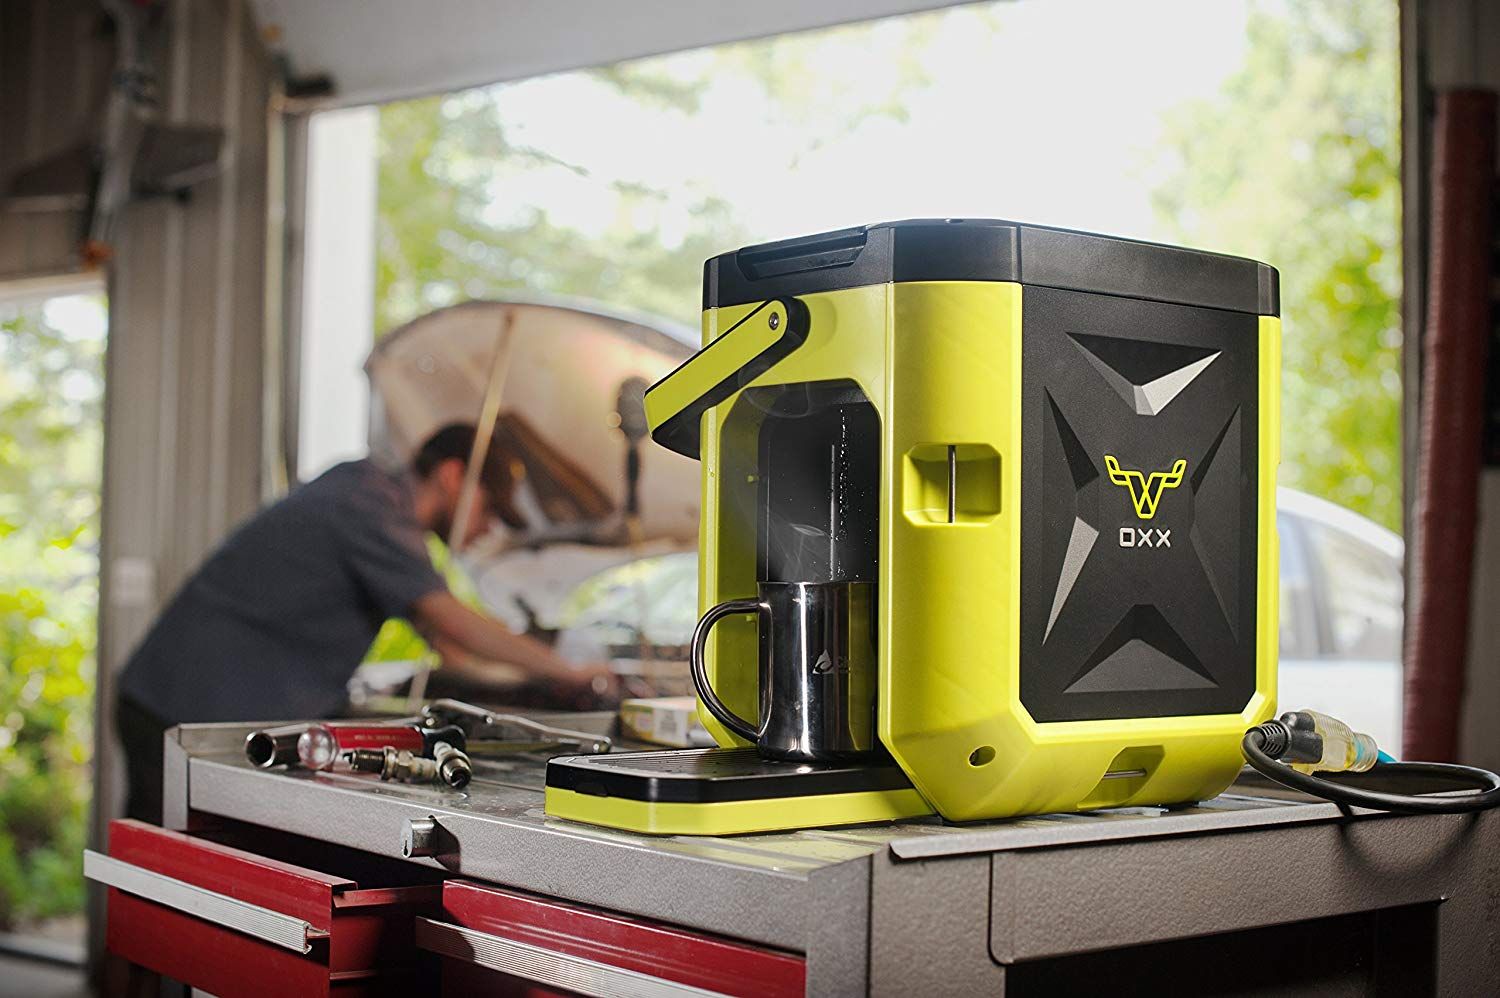 The Coffeeboxx is Built for Builders